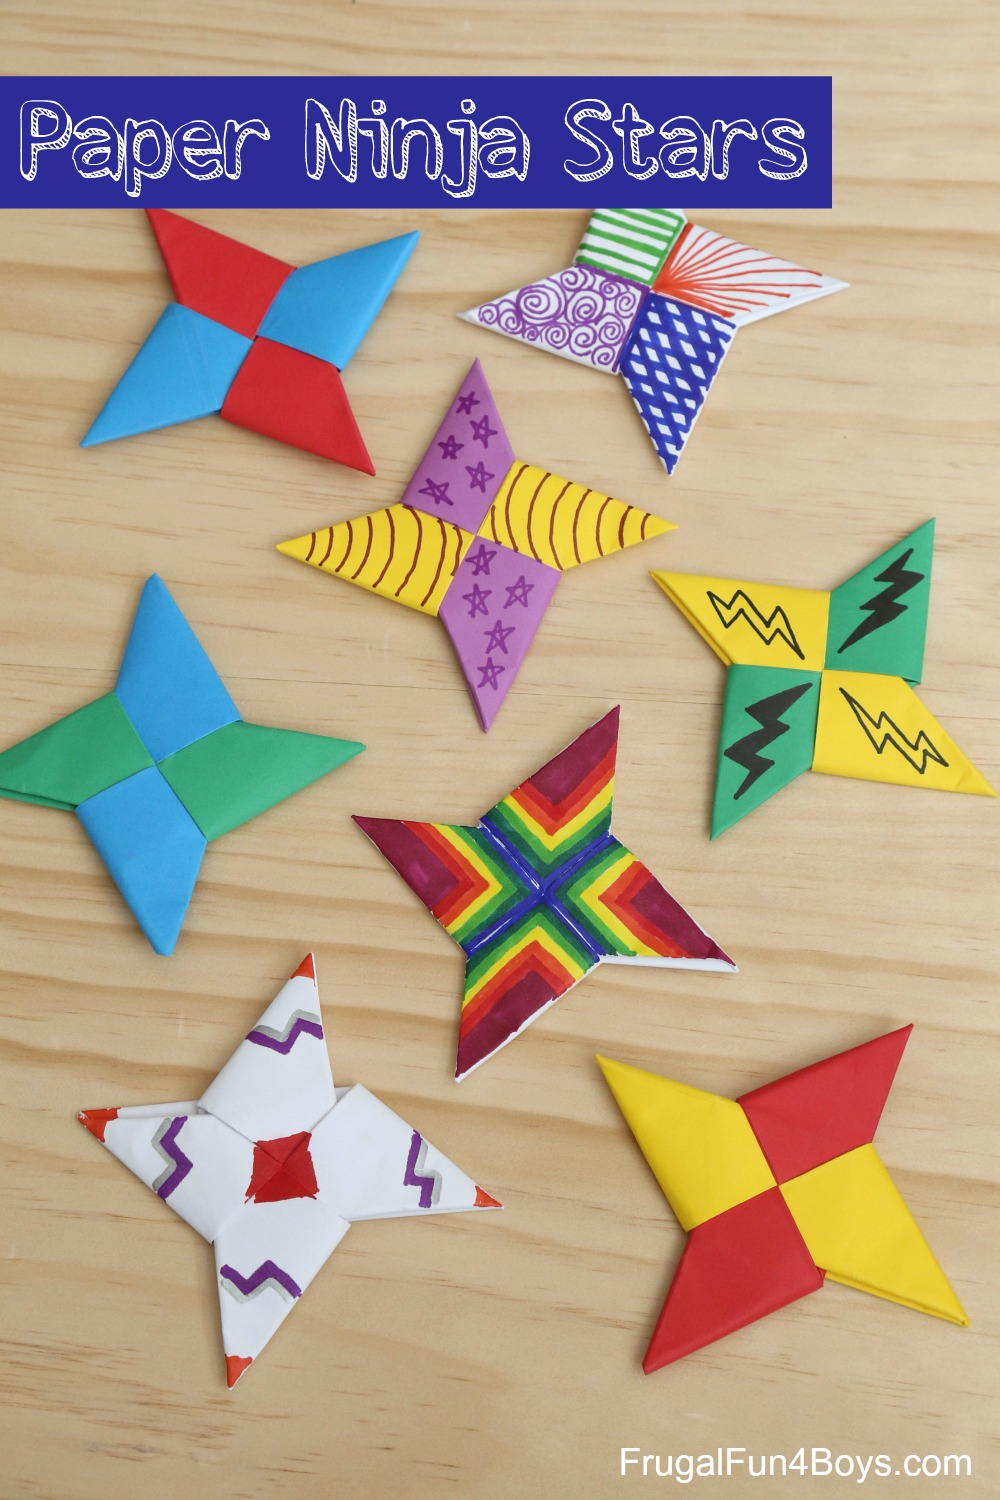 Printer Paper Origami How To Fold Paper Ninja Stars Frugal Fun For Boys And Girls